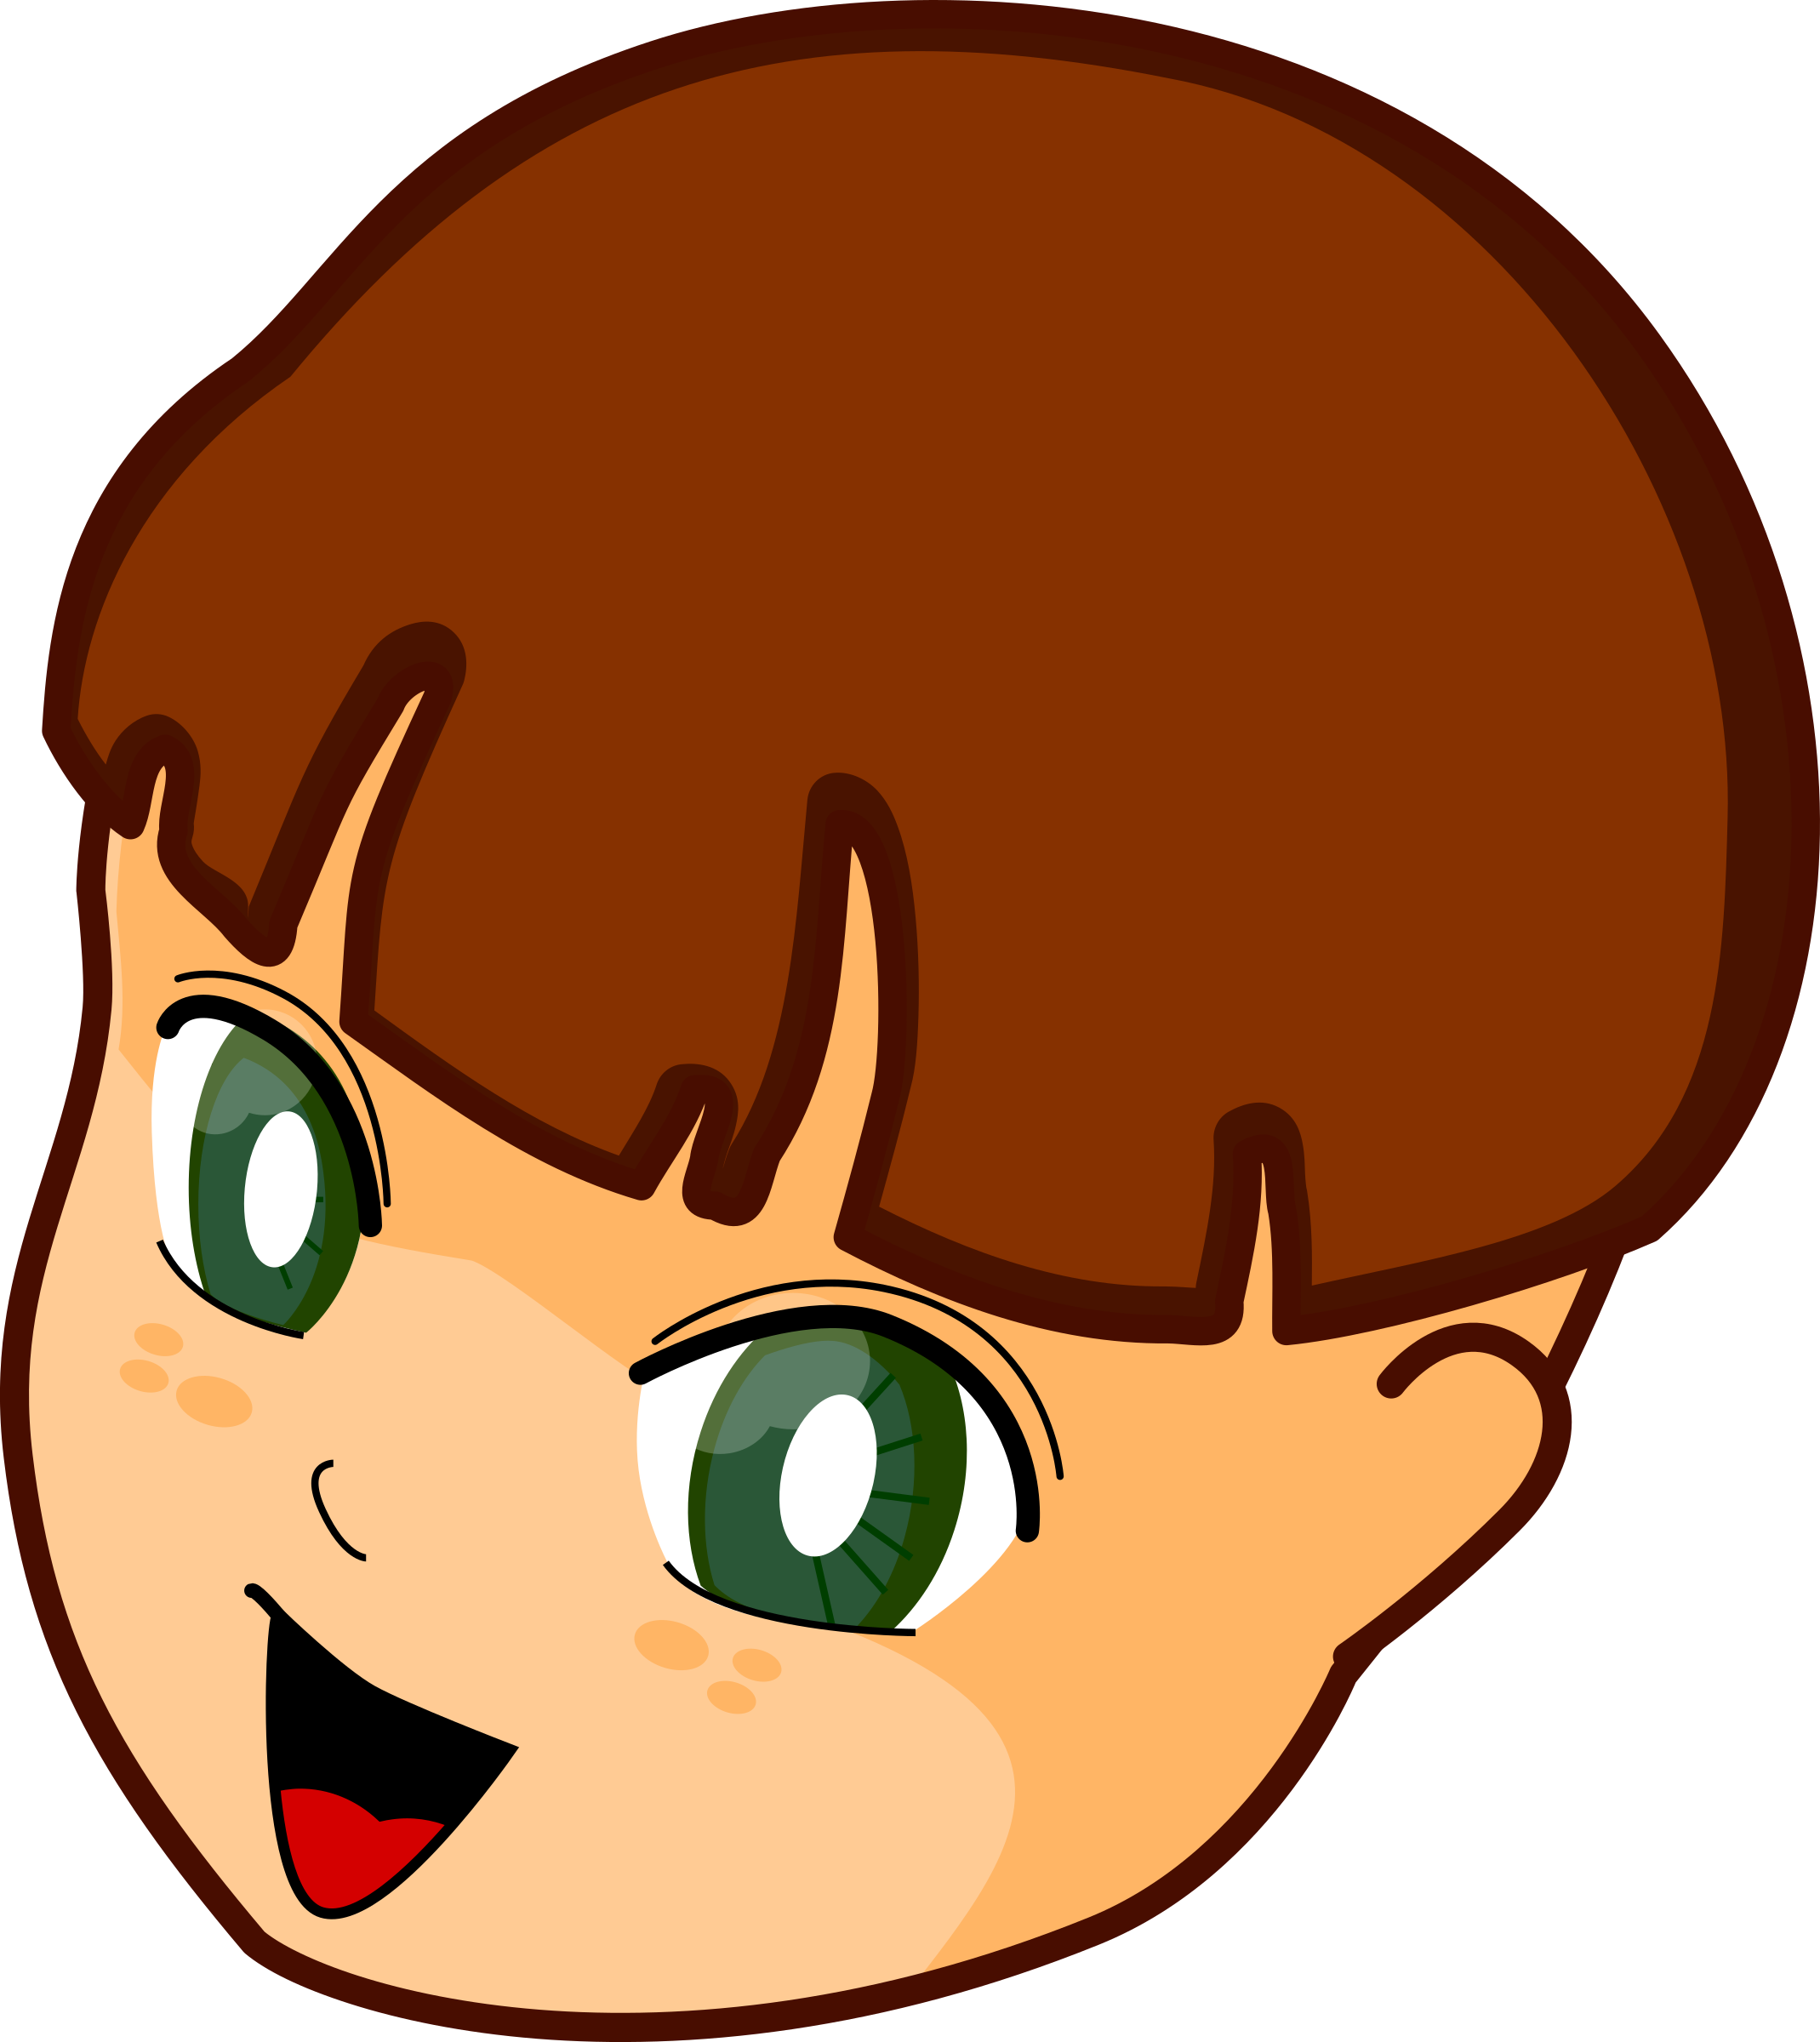 Boy big image png. Anime clipart happy